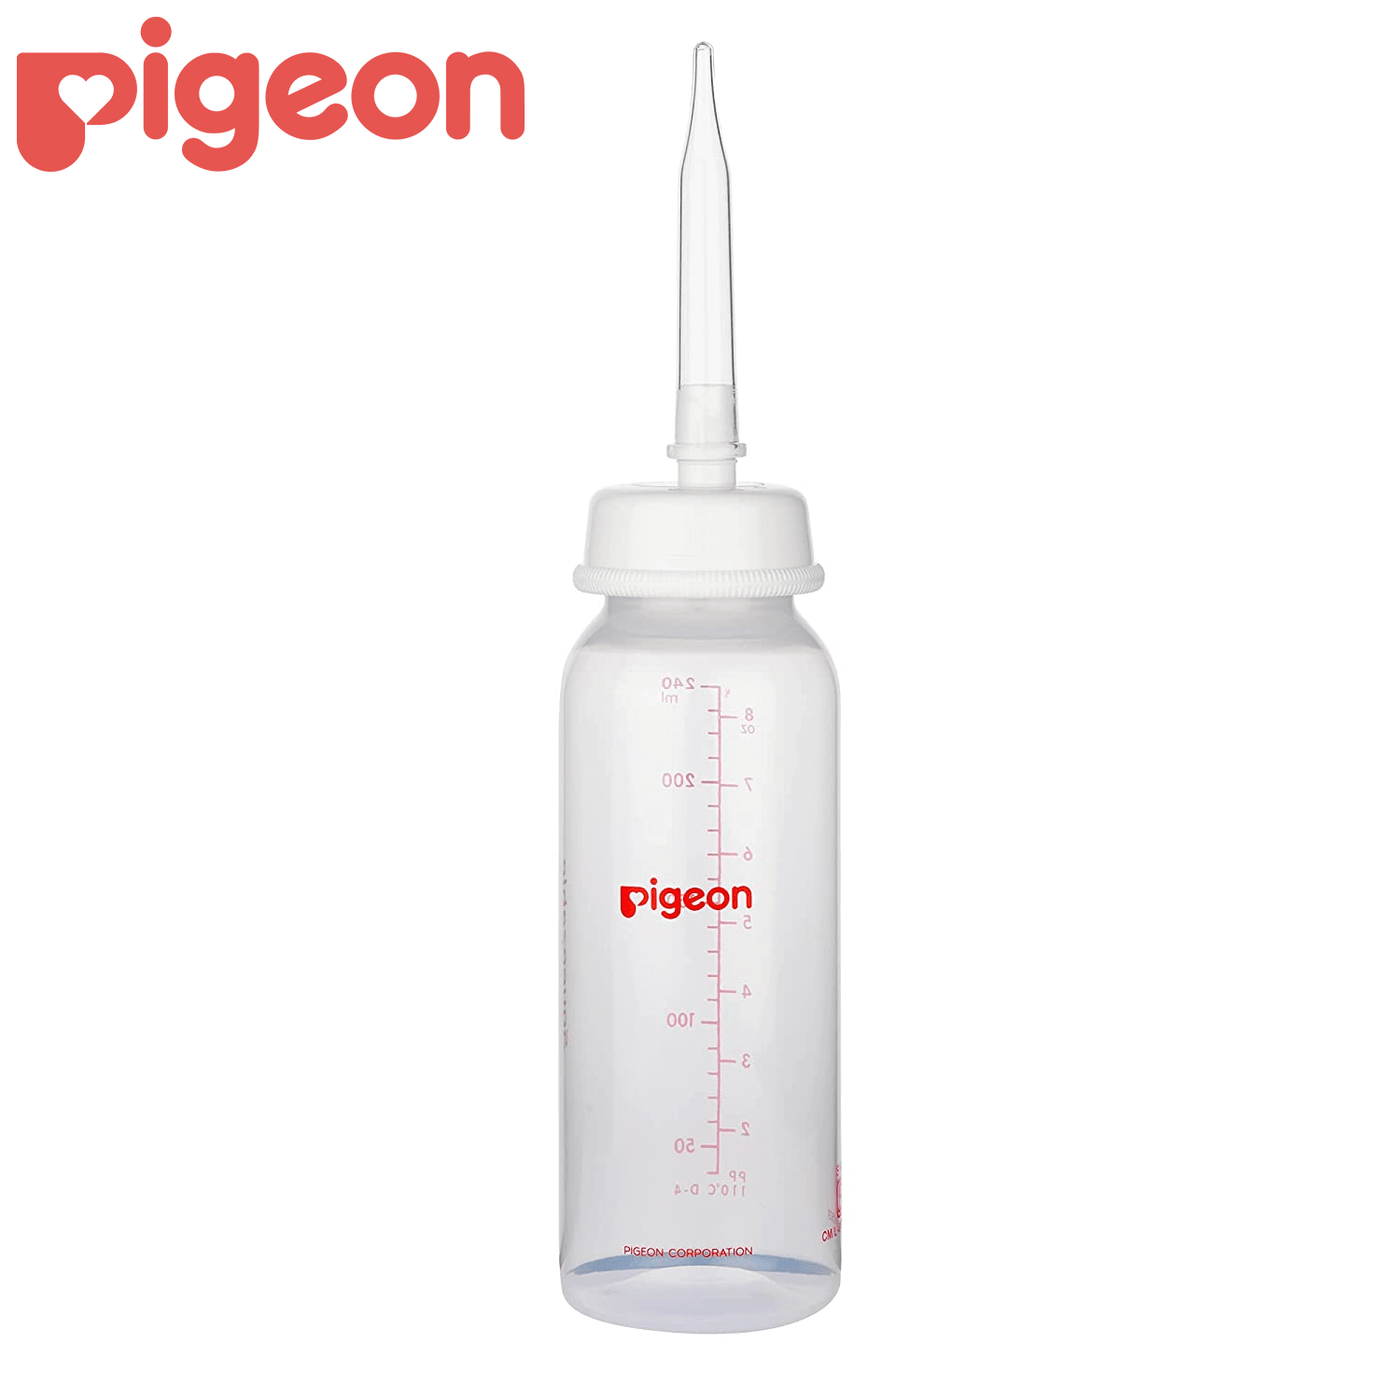 Pigeon Cleft Palate Feeding Bottle, Feeder with Silicone Long Nipple,BPA Free,BPS Free,Adjustable Milk Flow,240 ml